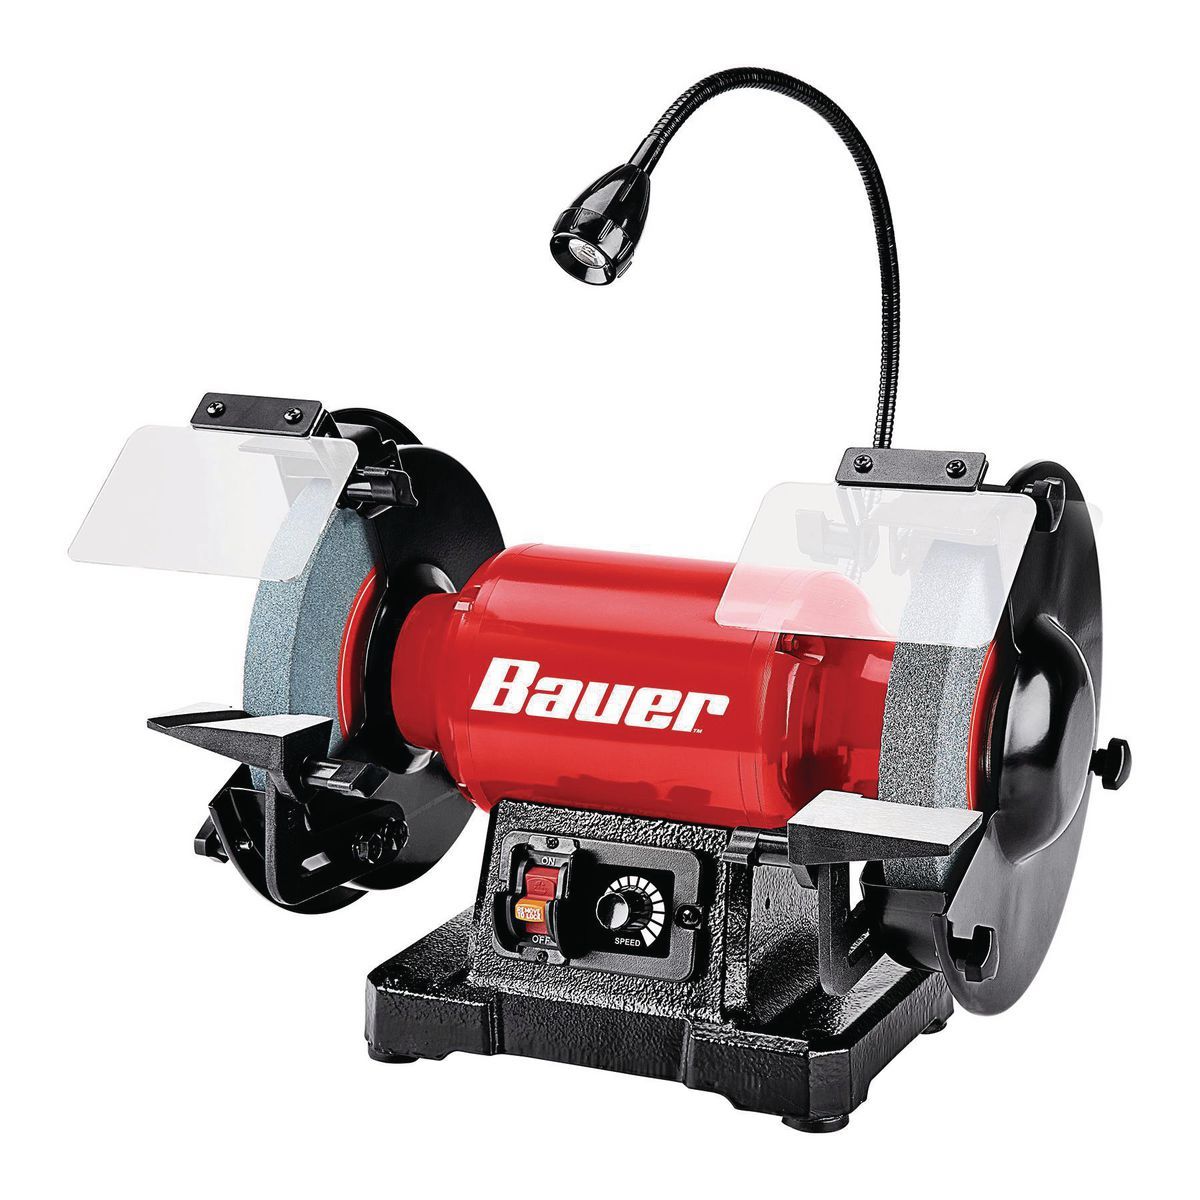 BAUER 8 in.  Variable Speed Bench Grinder with LED Work Light